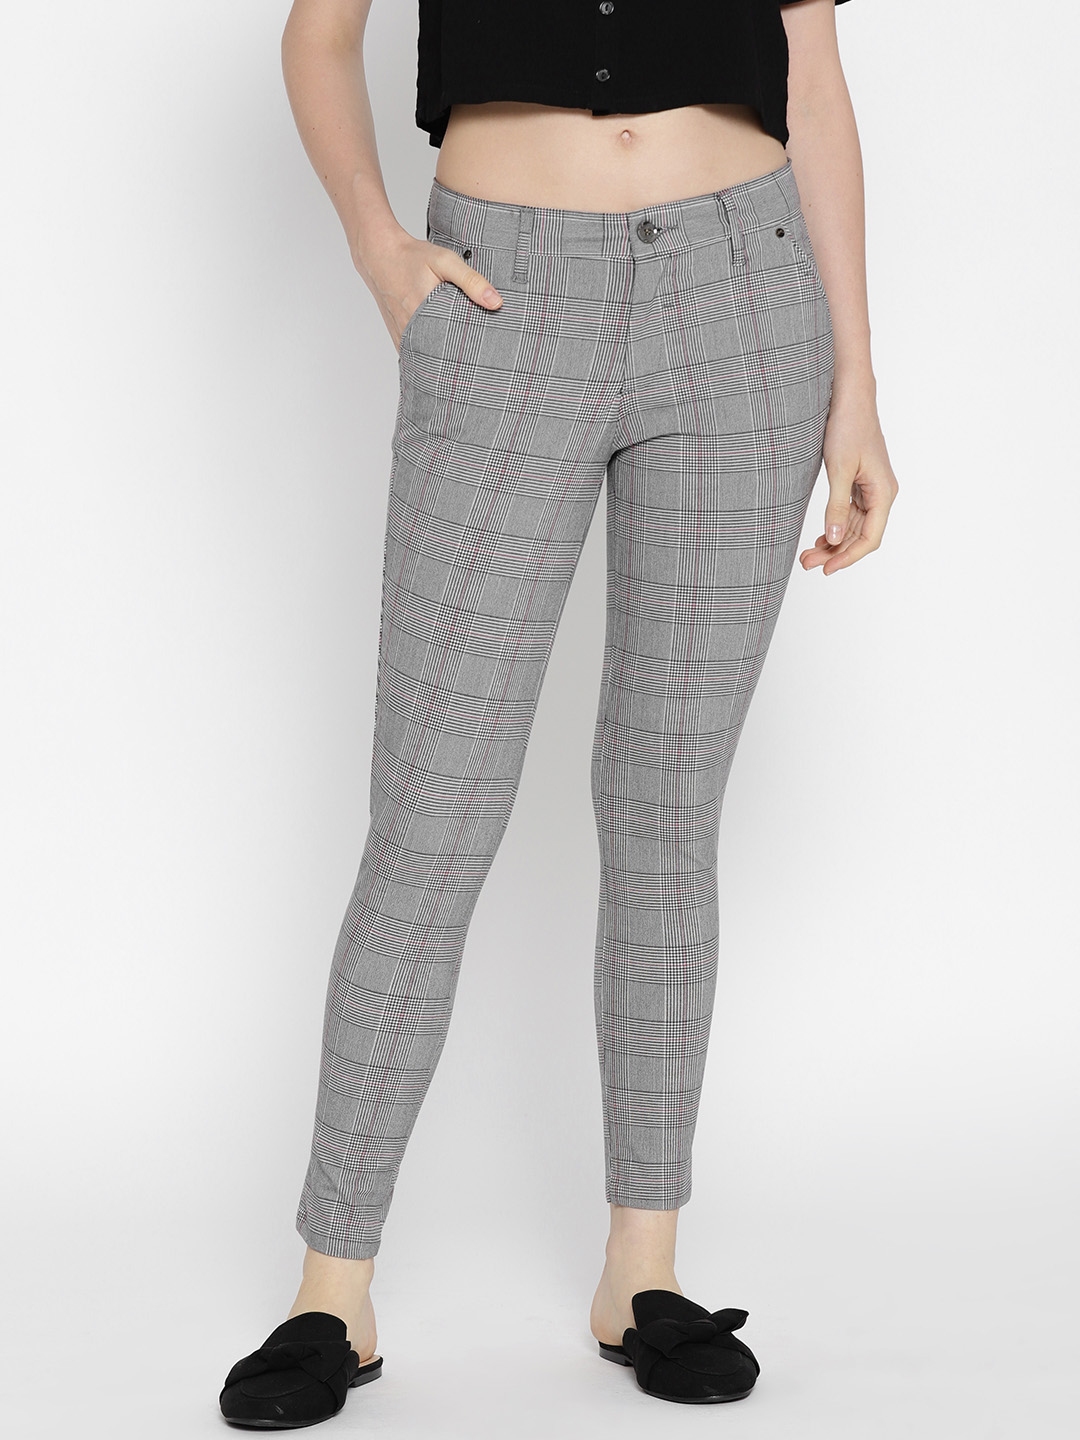 Trendy Check Trouser for girls and women stretchable with elasticated waist